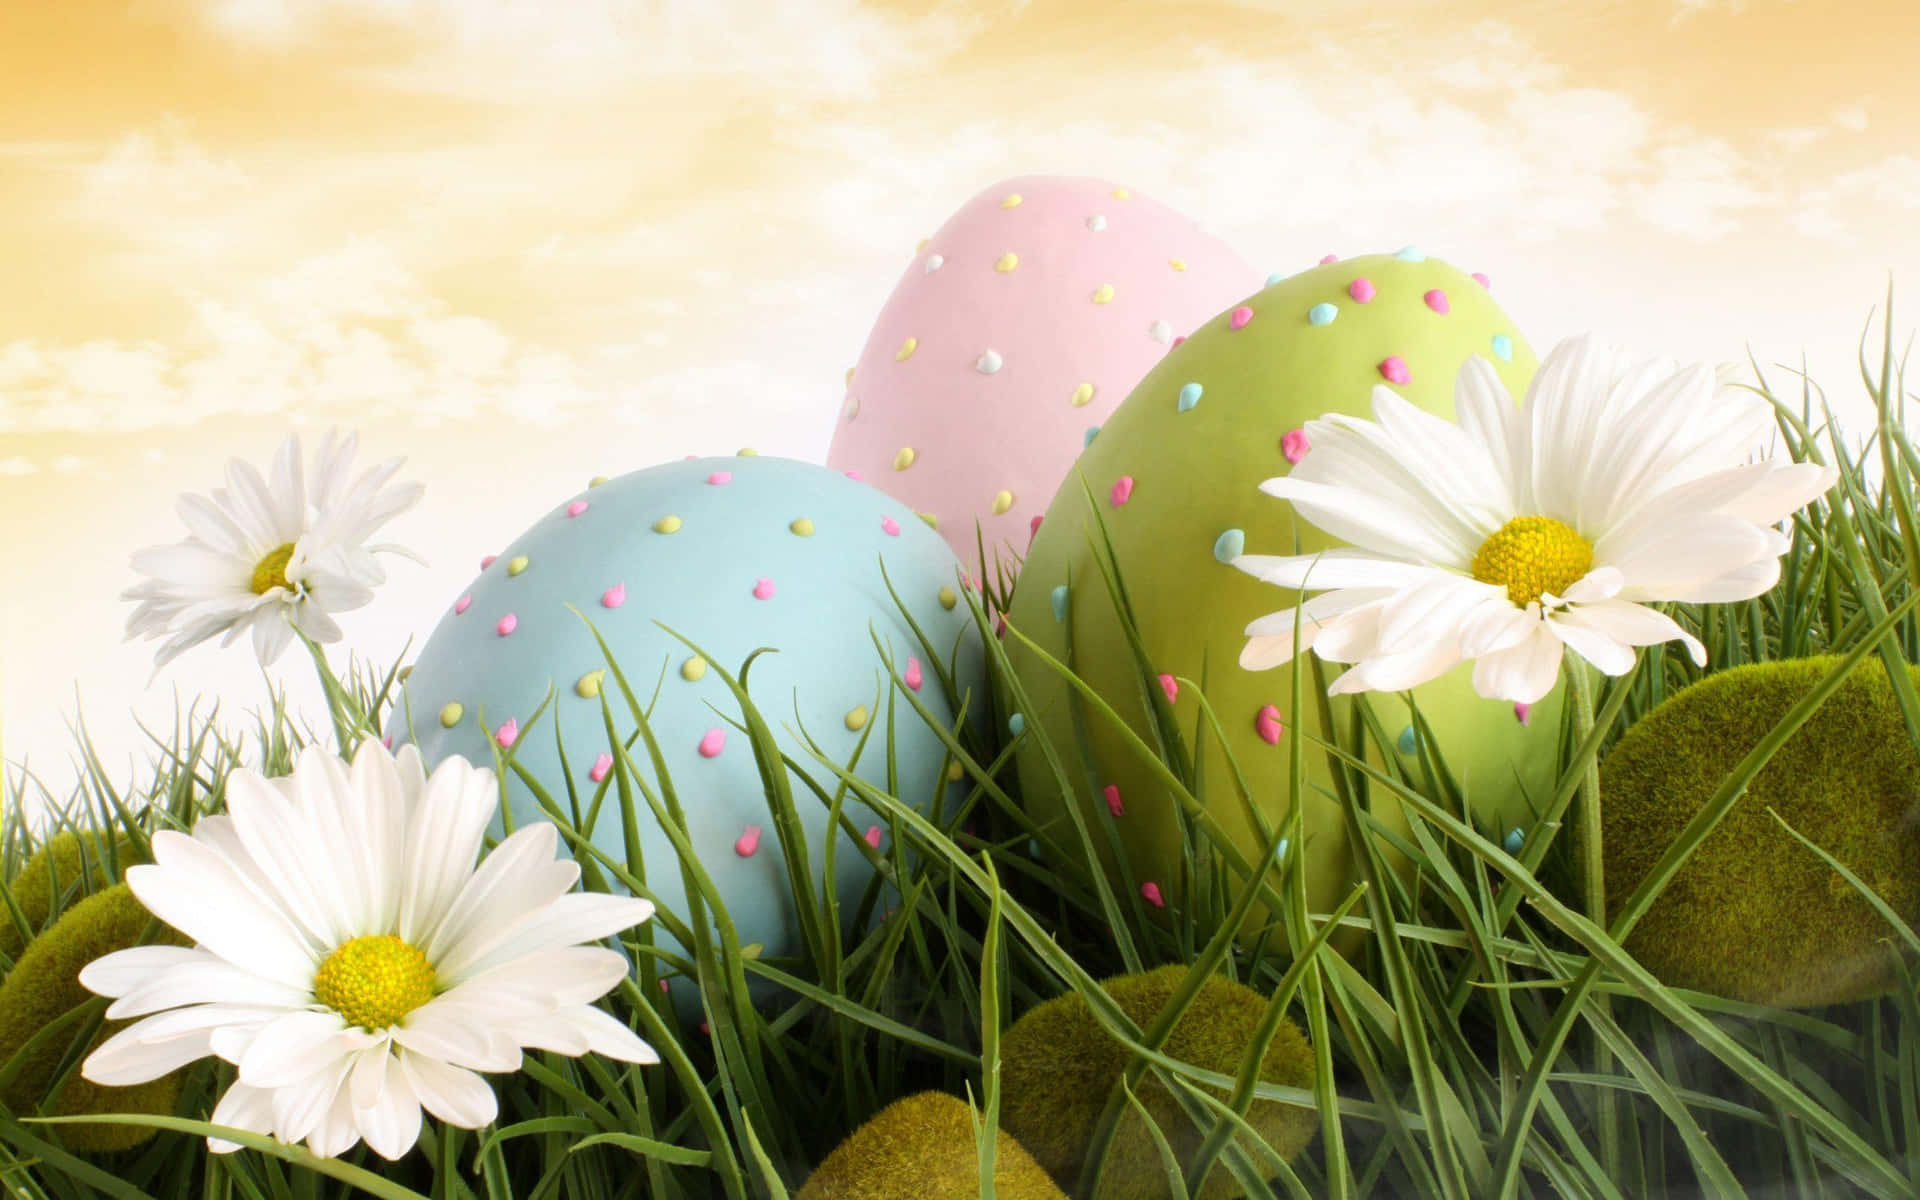 Celebrate Easter with family and friends!